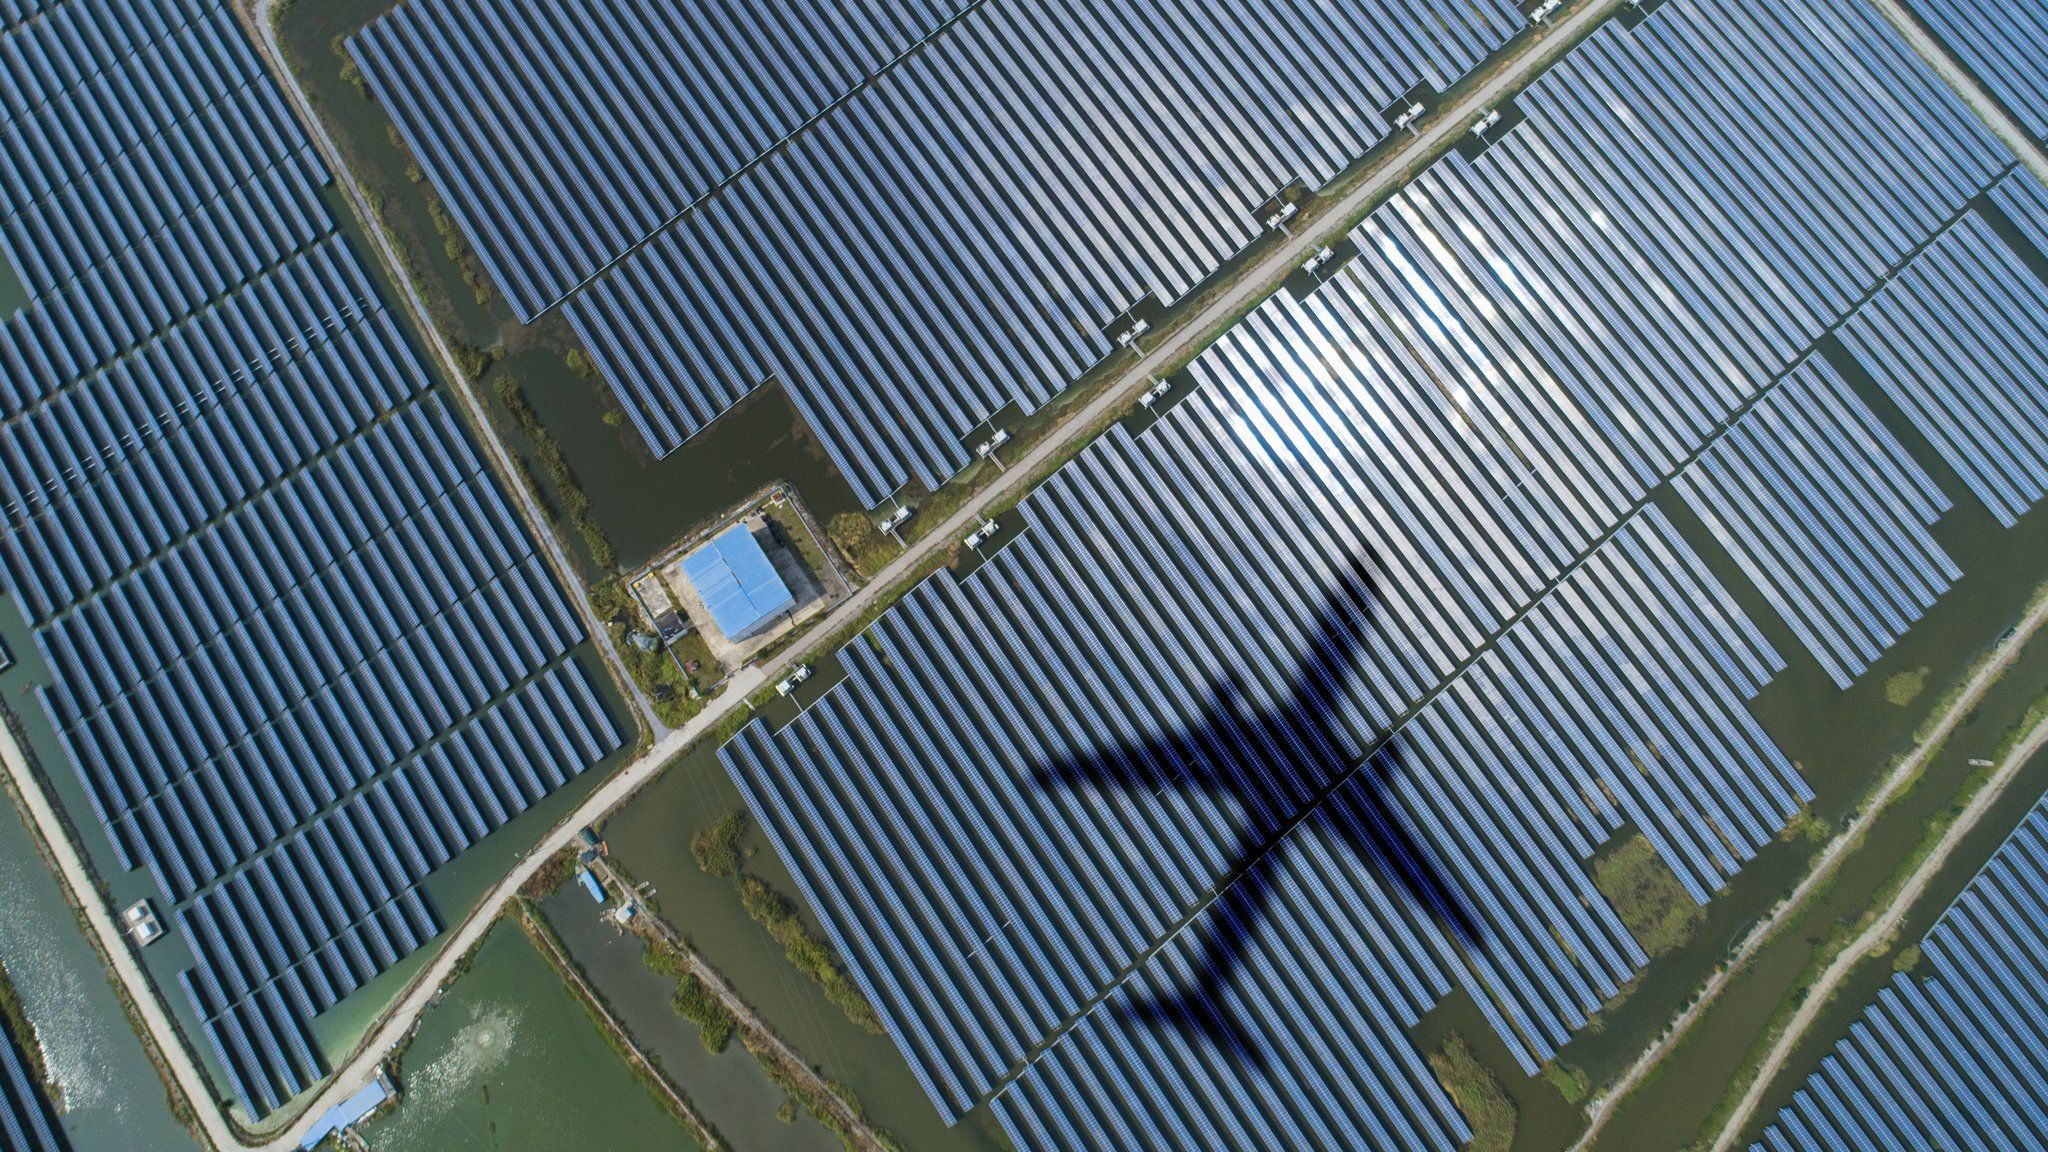 Solar energy panels with shadow of a plane